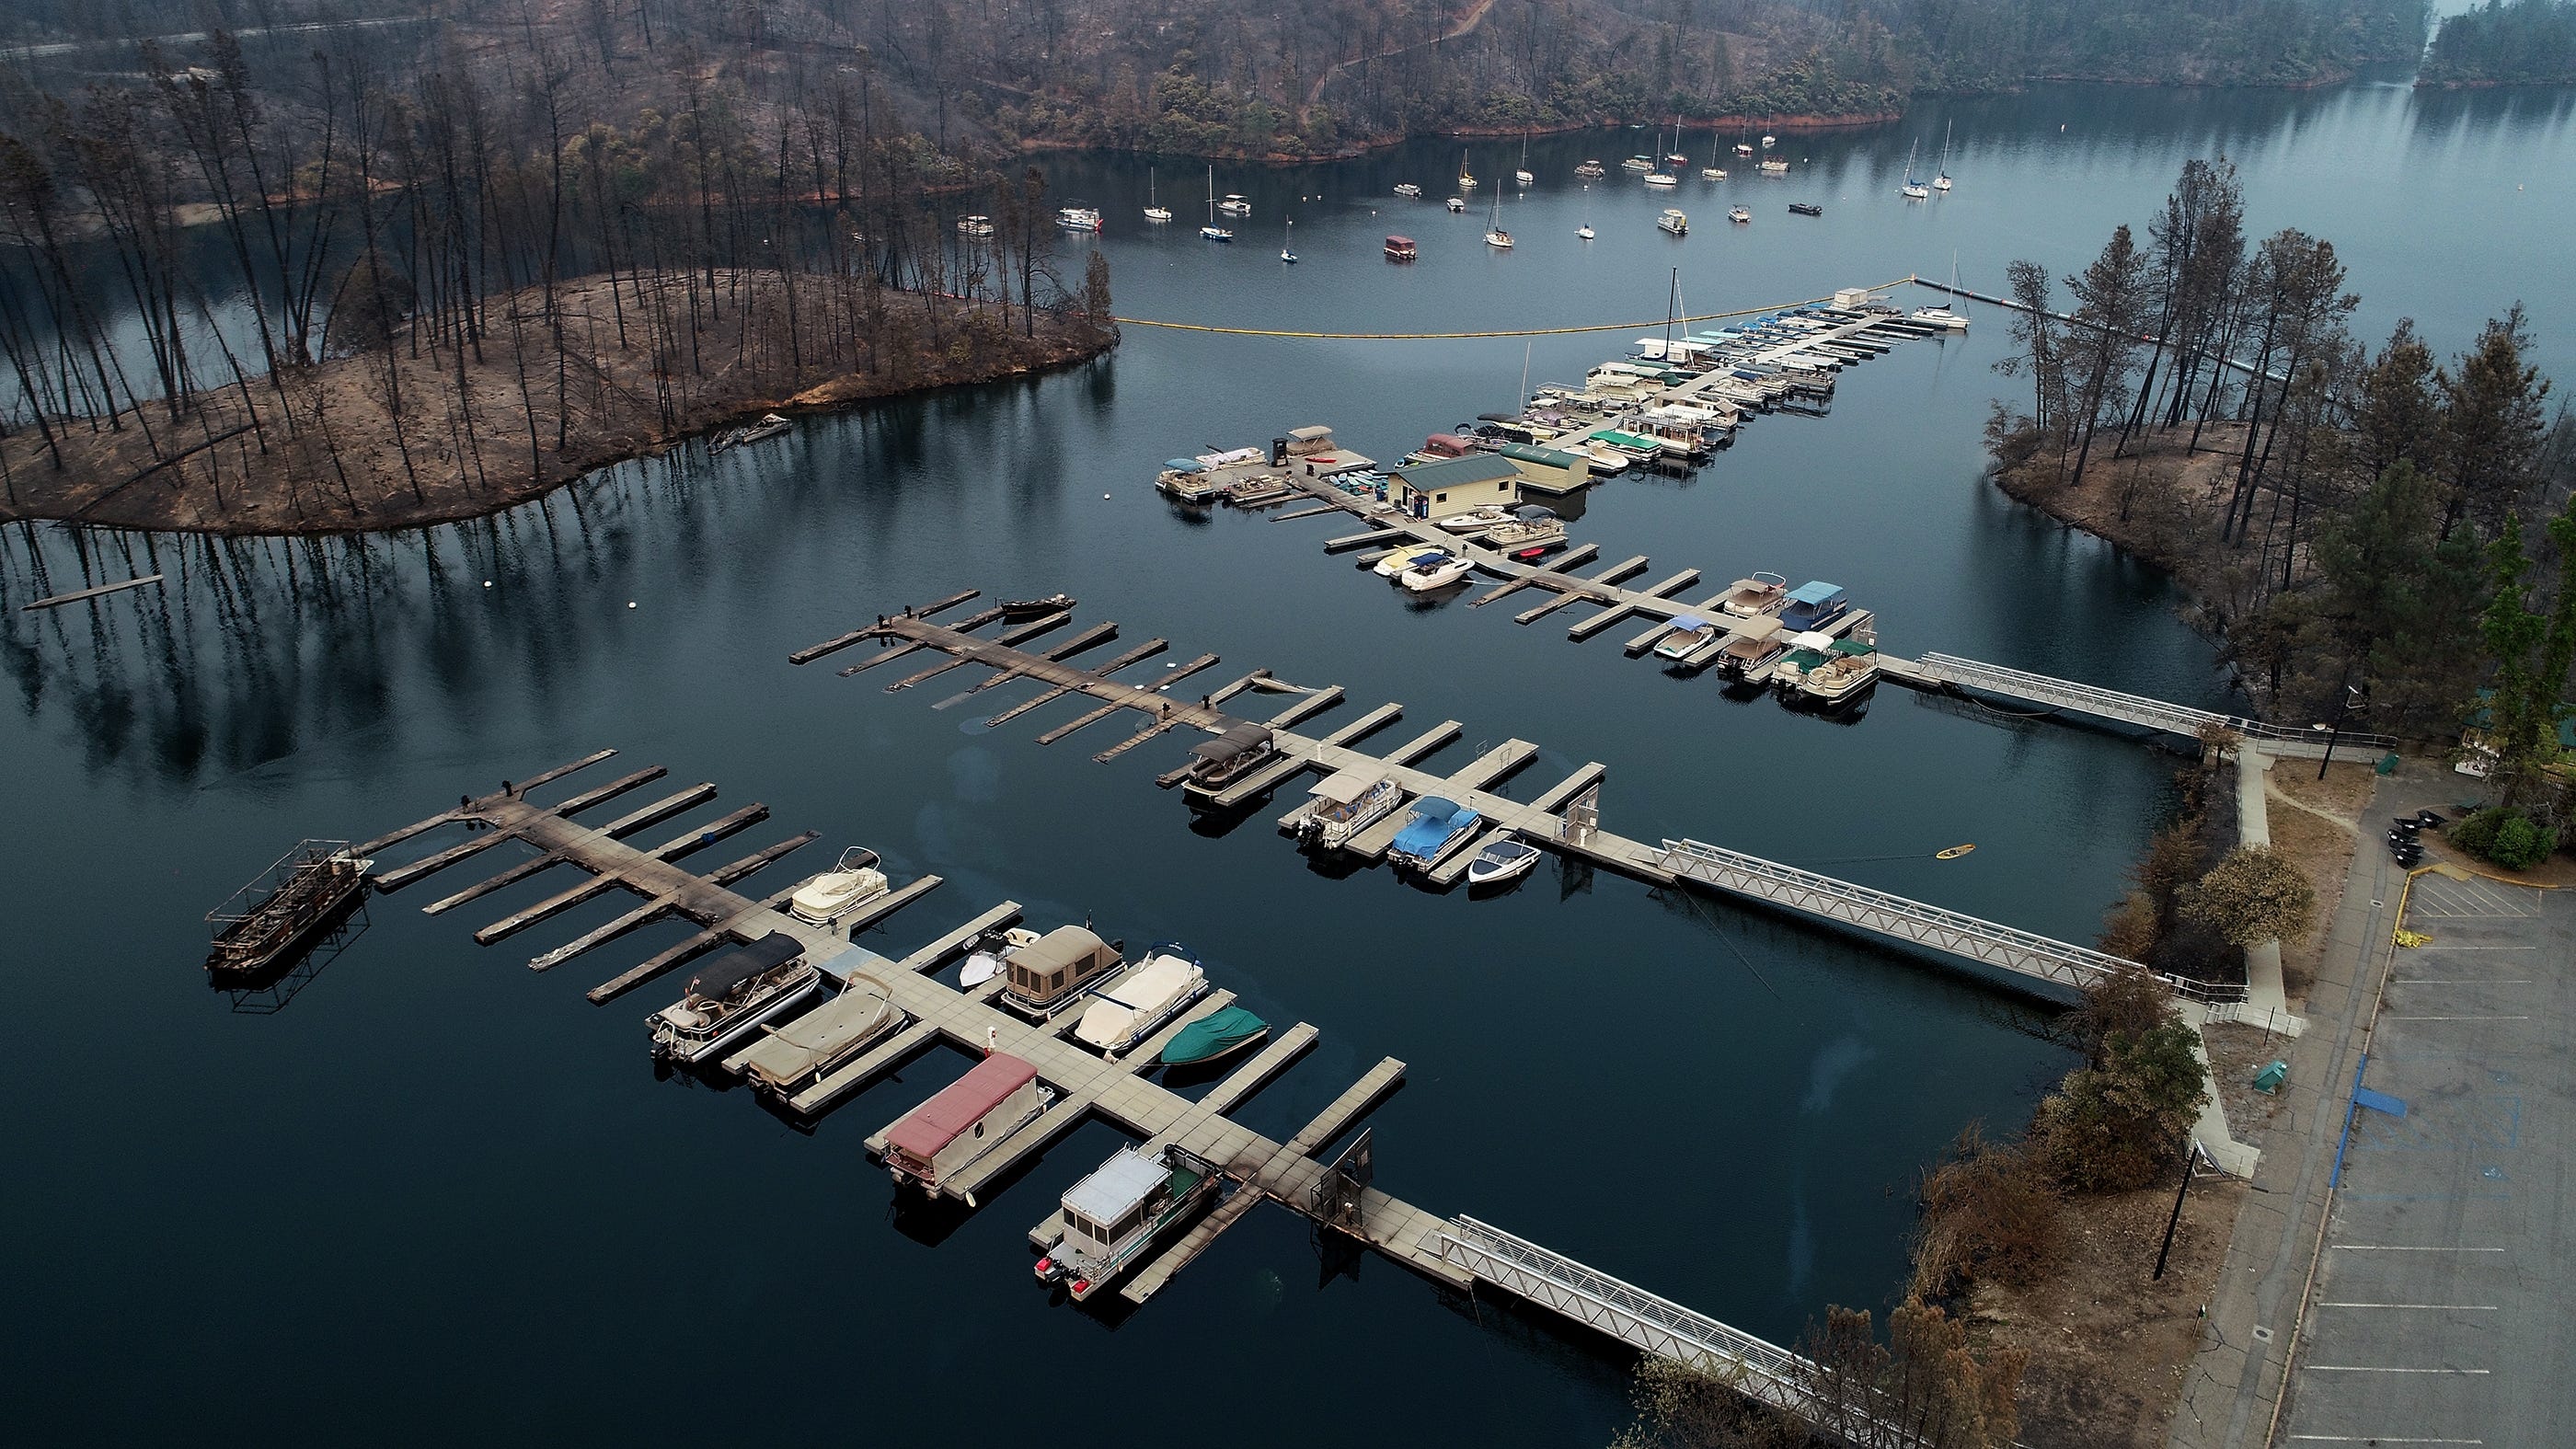 Damage from the Carr Fire is seen at Oak Bottom Marina in Whiskeytown, Calif. Aug. 1, 2018. Several boats were affected by the fire when it rolled through the area late last week.